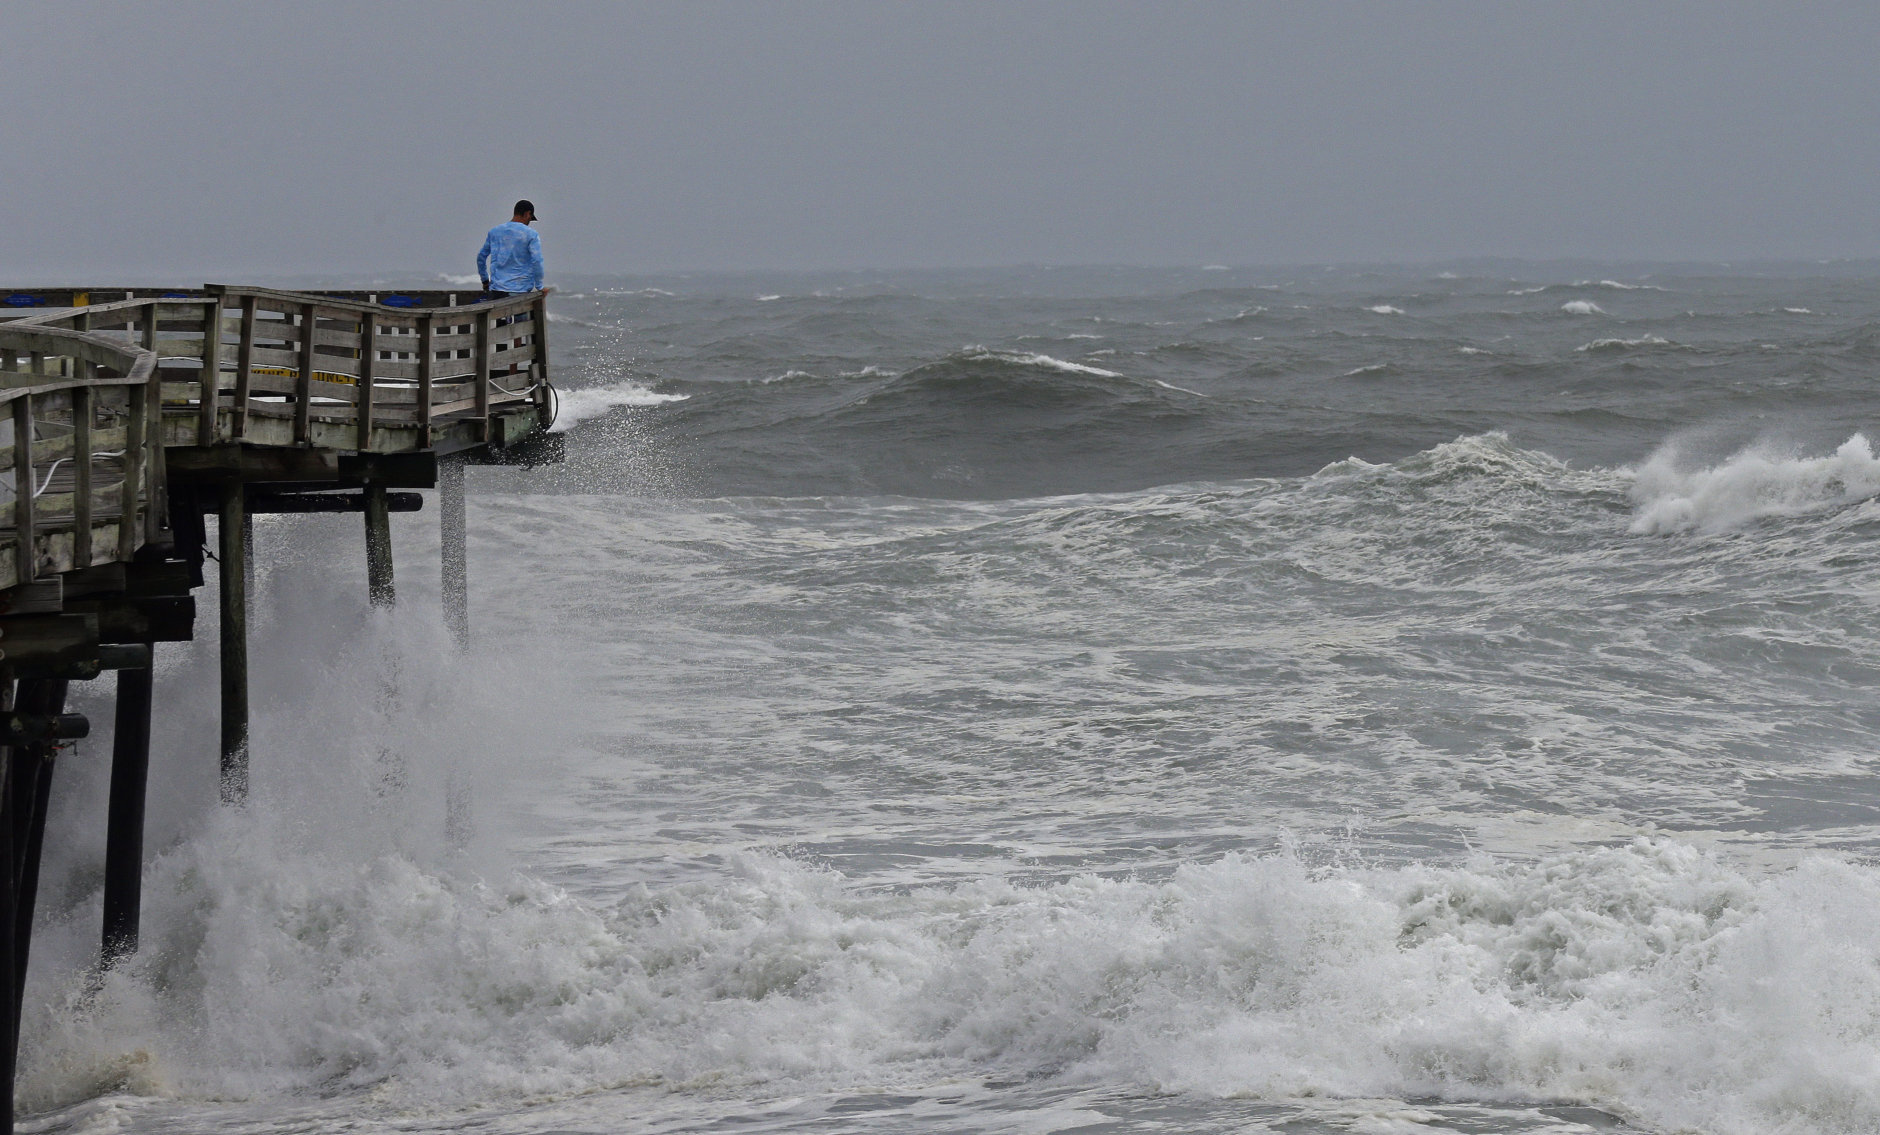 An onlooker checks out the heavy surf at the Avalon Fishing Pier in Kill Devil Hills, N.C., Thursday, Sept. 13, 2018 as Hurricane Florence approaches the east coast. (AP Photo/Gerry Broome)